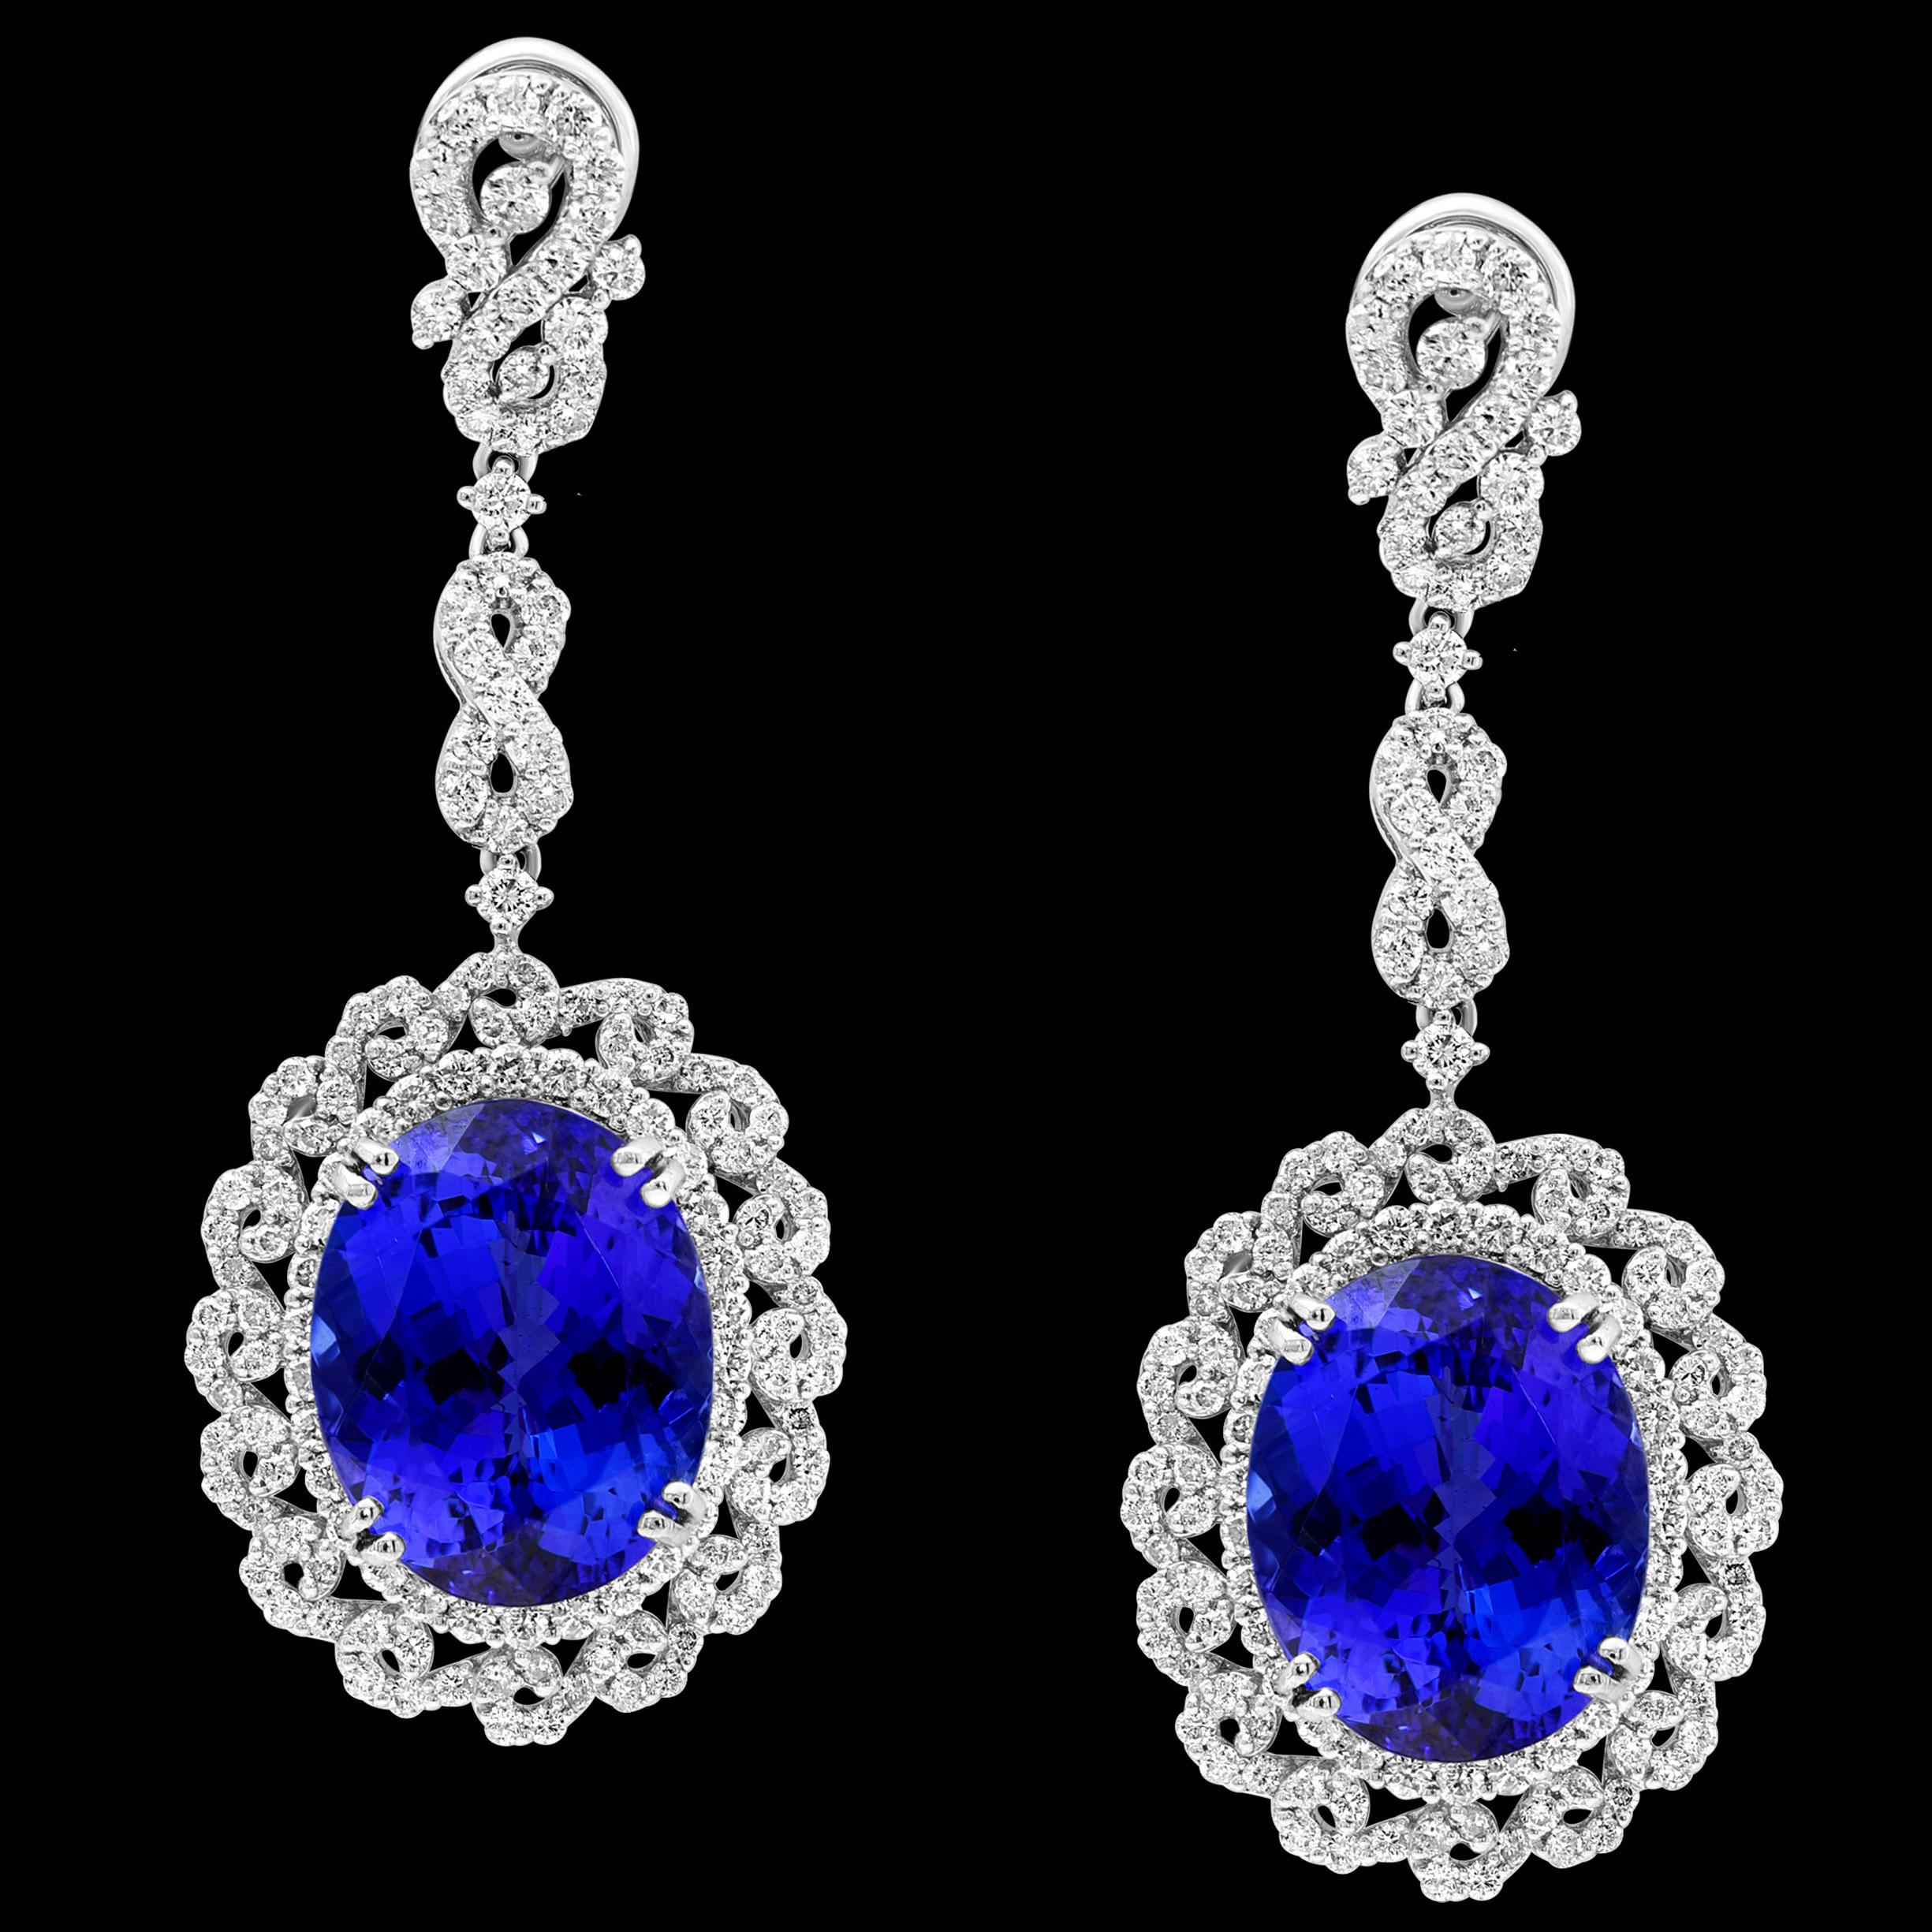 28 Carat Oval Tanzanite and Diamond Hanging or Cocktail Earring 18 Karat White Gold
perfect pair made in 18 carat White gold . 
18 K gold : 17.8 Grams
Diamonds: approximate 4.5 ct carats
Tanzanite: 28 Carats
We encourage you to take a look at all